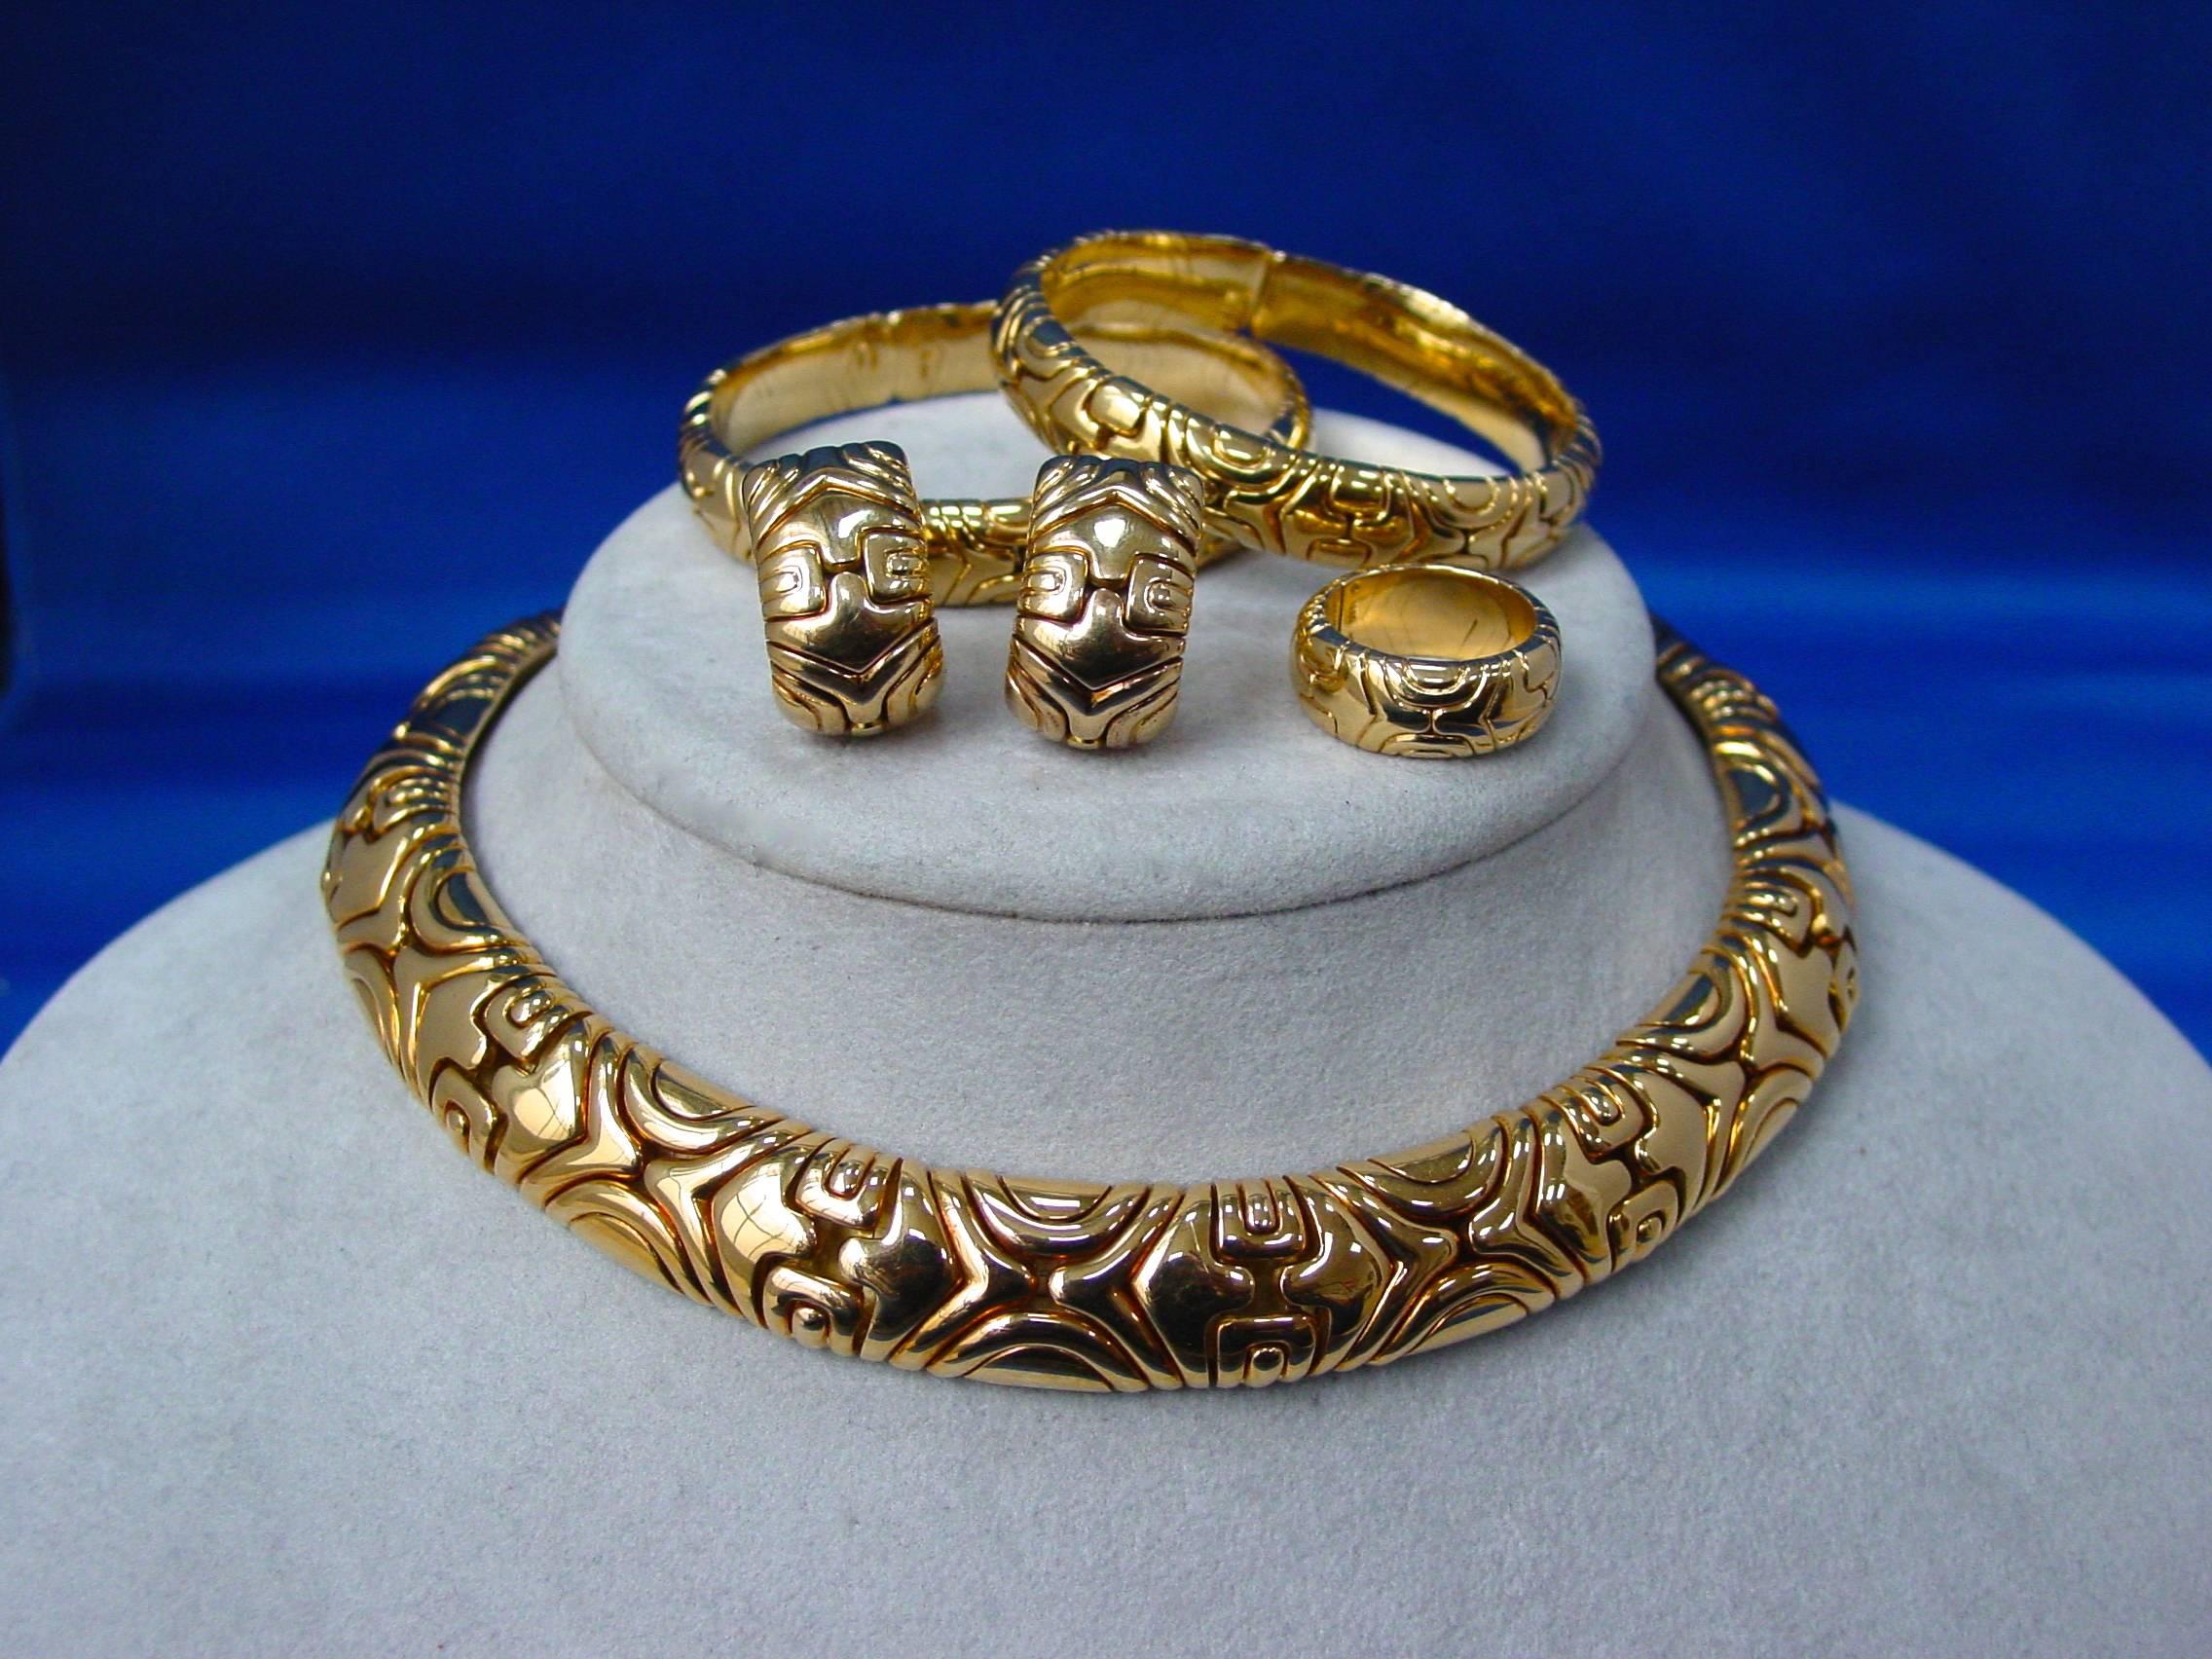 An 18 Karat Yellow Gold Suite of  “Alveare” jewelry by Bulgari. This incredibly collectible suite consists of two bracelets, a ring, a pair of clip earrings and a 15” necklace. We've come across individual pieces before but a complete suite is a